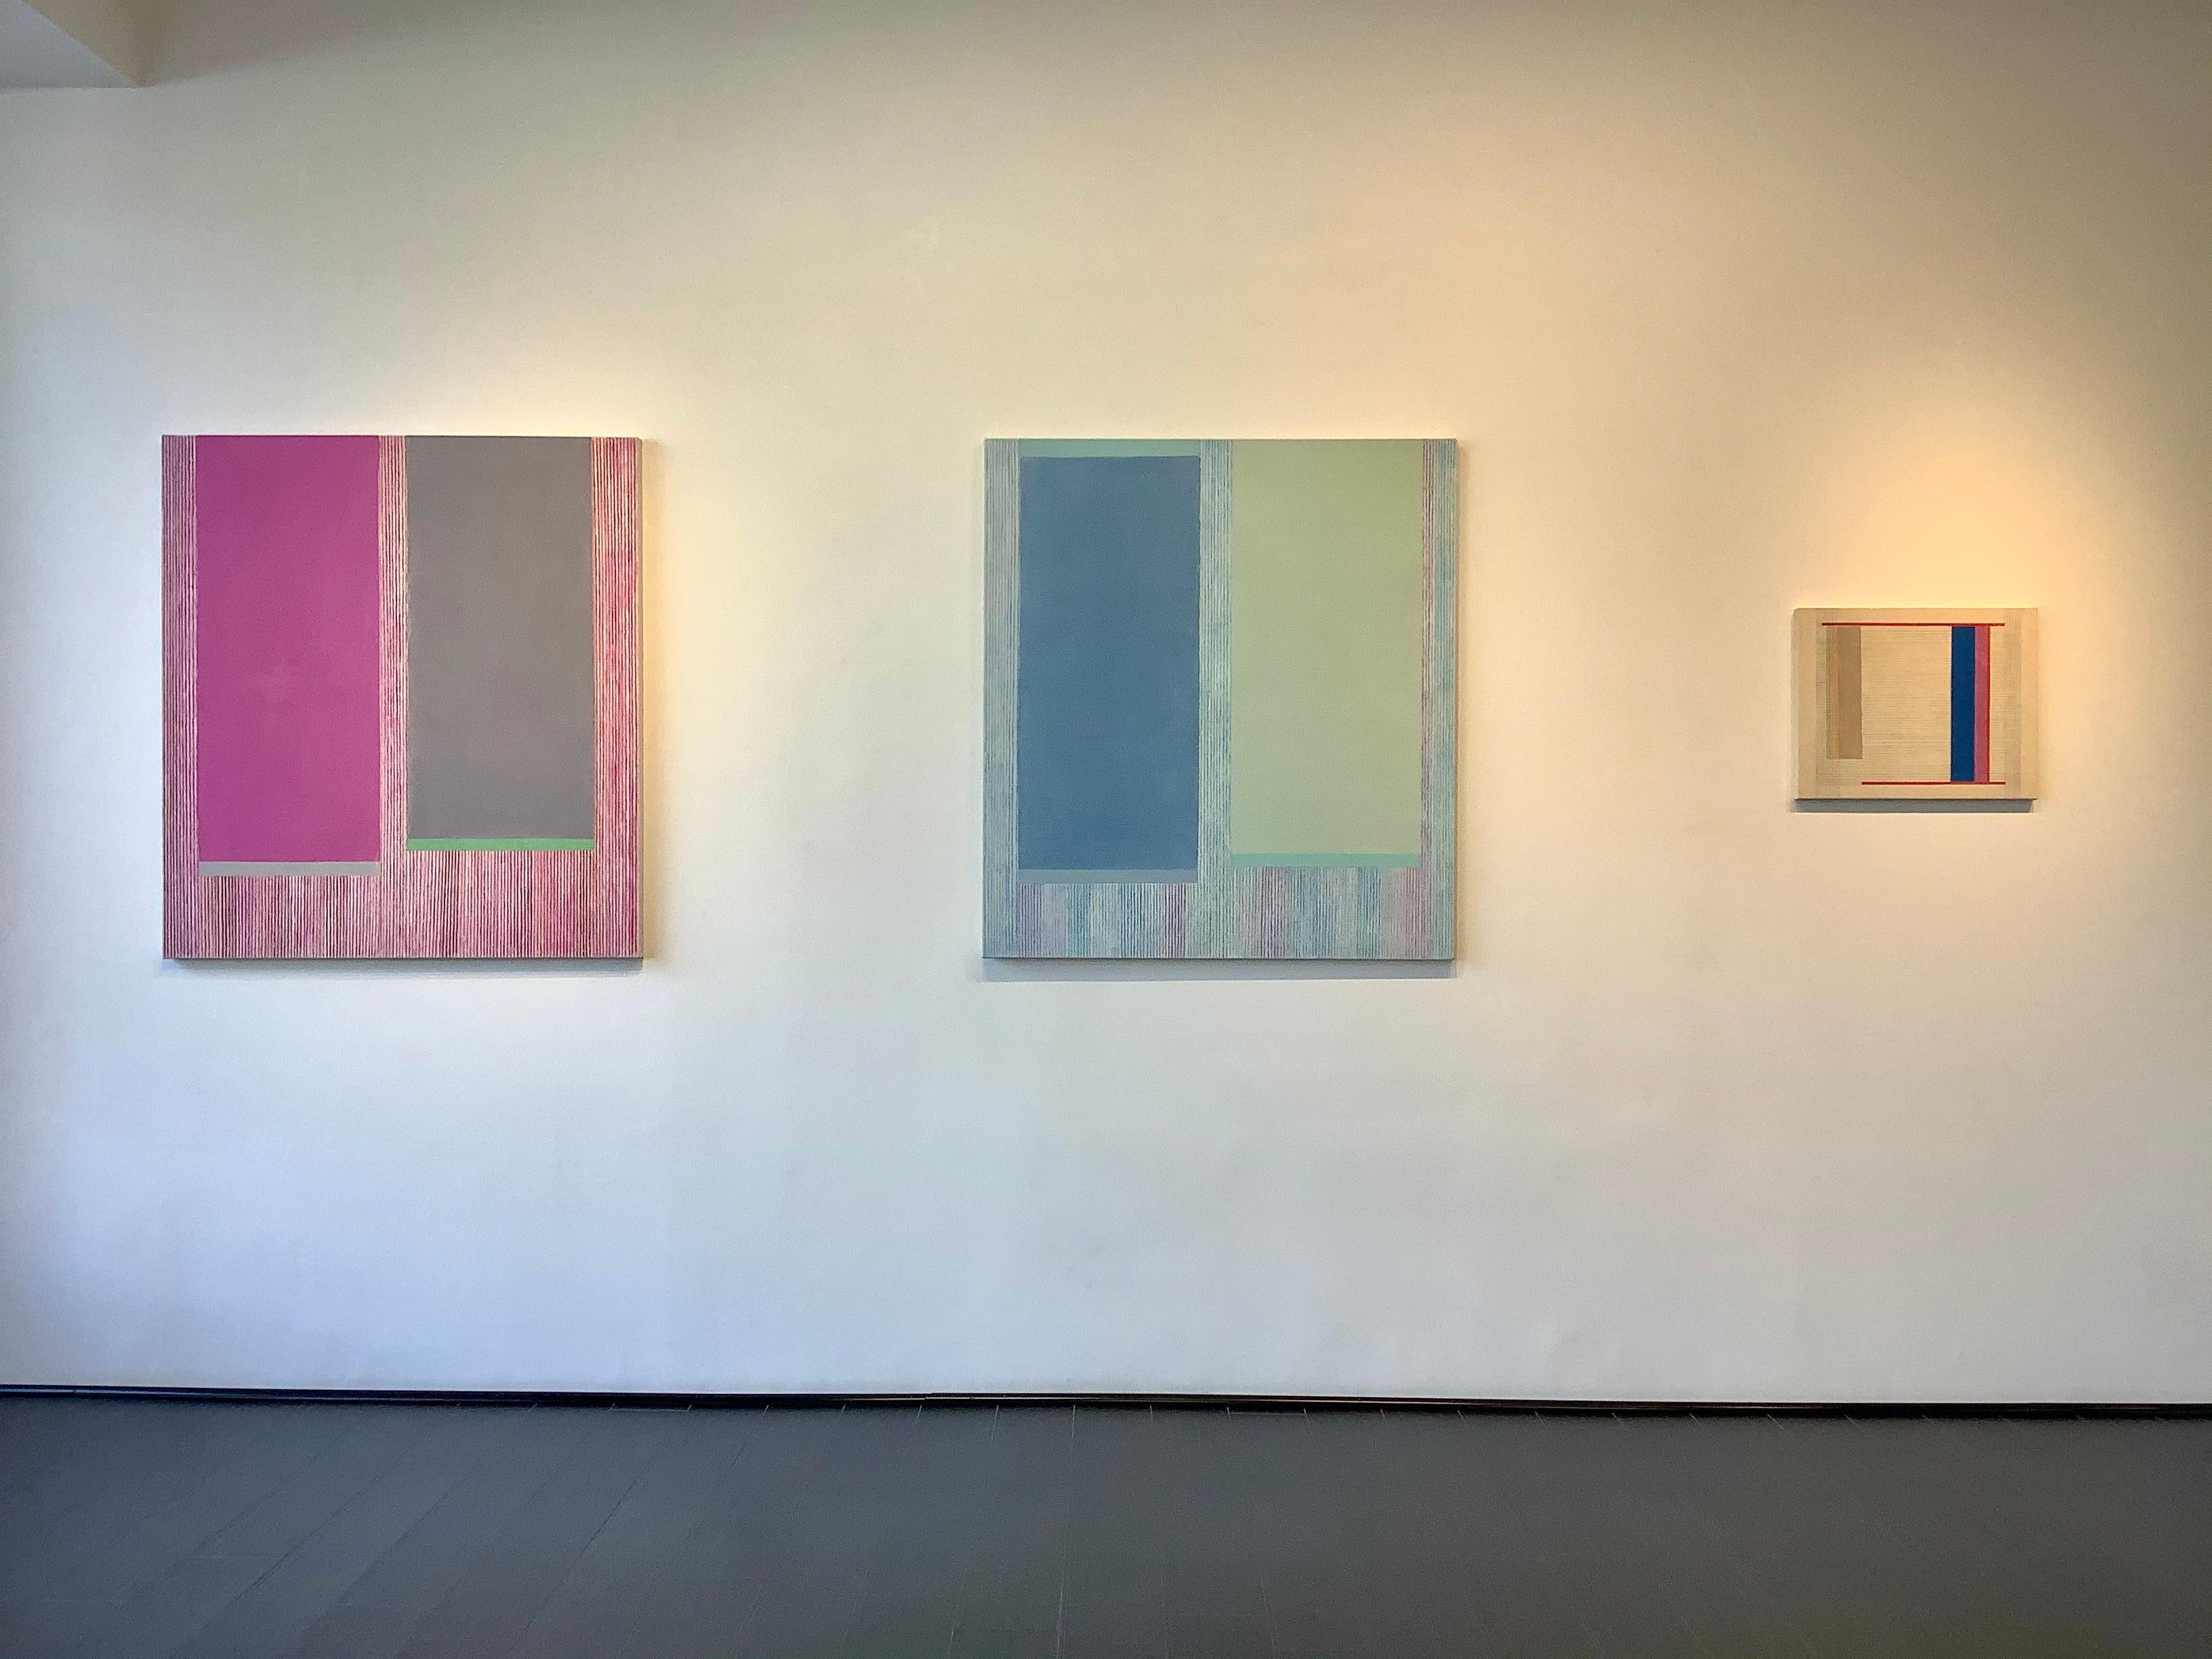 In this abstract painting in colored pencil and acrylic on canvas by Elizabeth Gourlay, clean and precise, carefully ordered blocks of color in blue gray and light sage green are lively and vibrant while thin, delicate lines in blue and violet frame